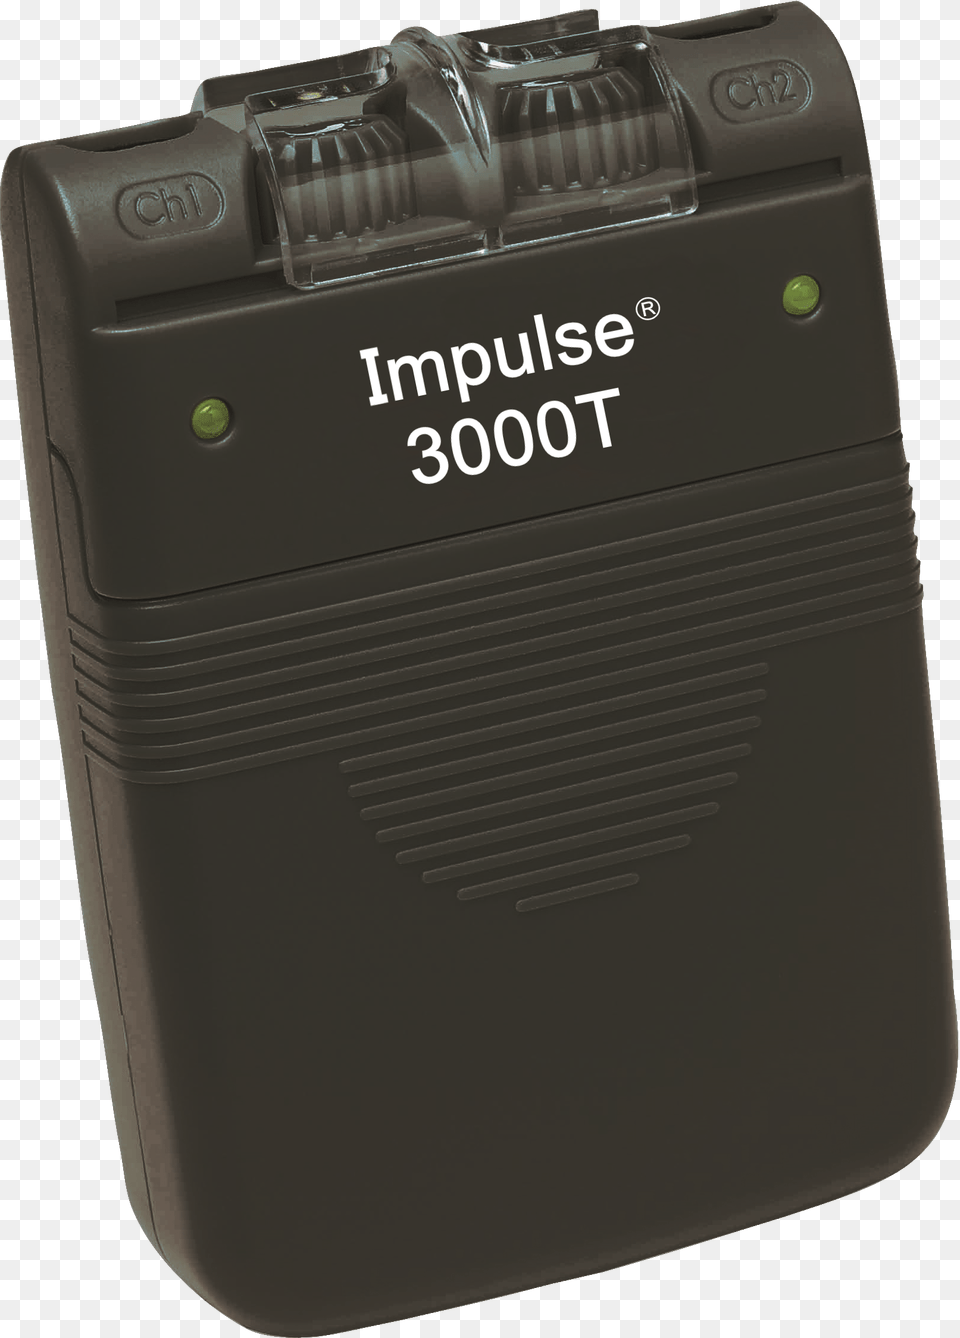 Impulse Timer, Electronics, Mailbox, Adapter, Tape Player Png